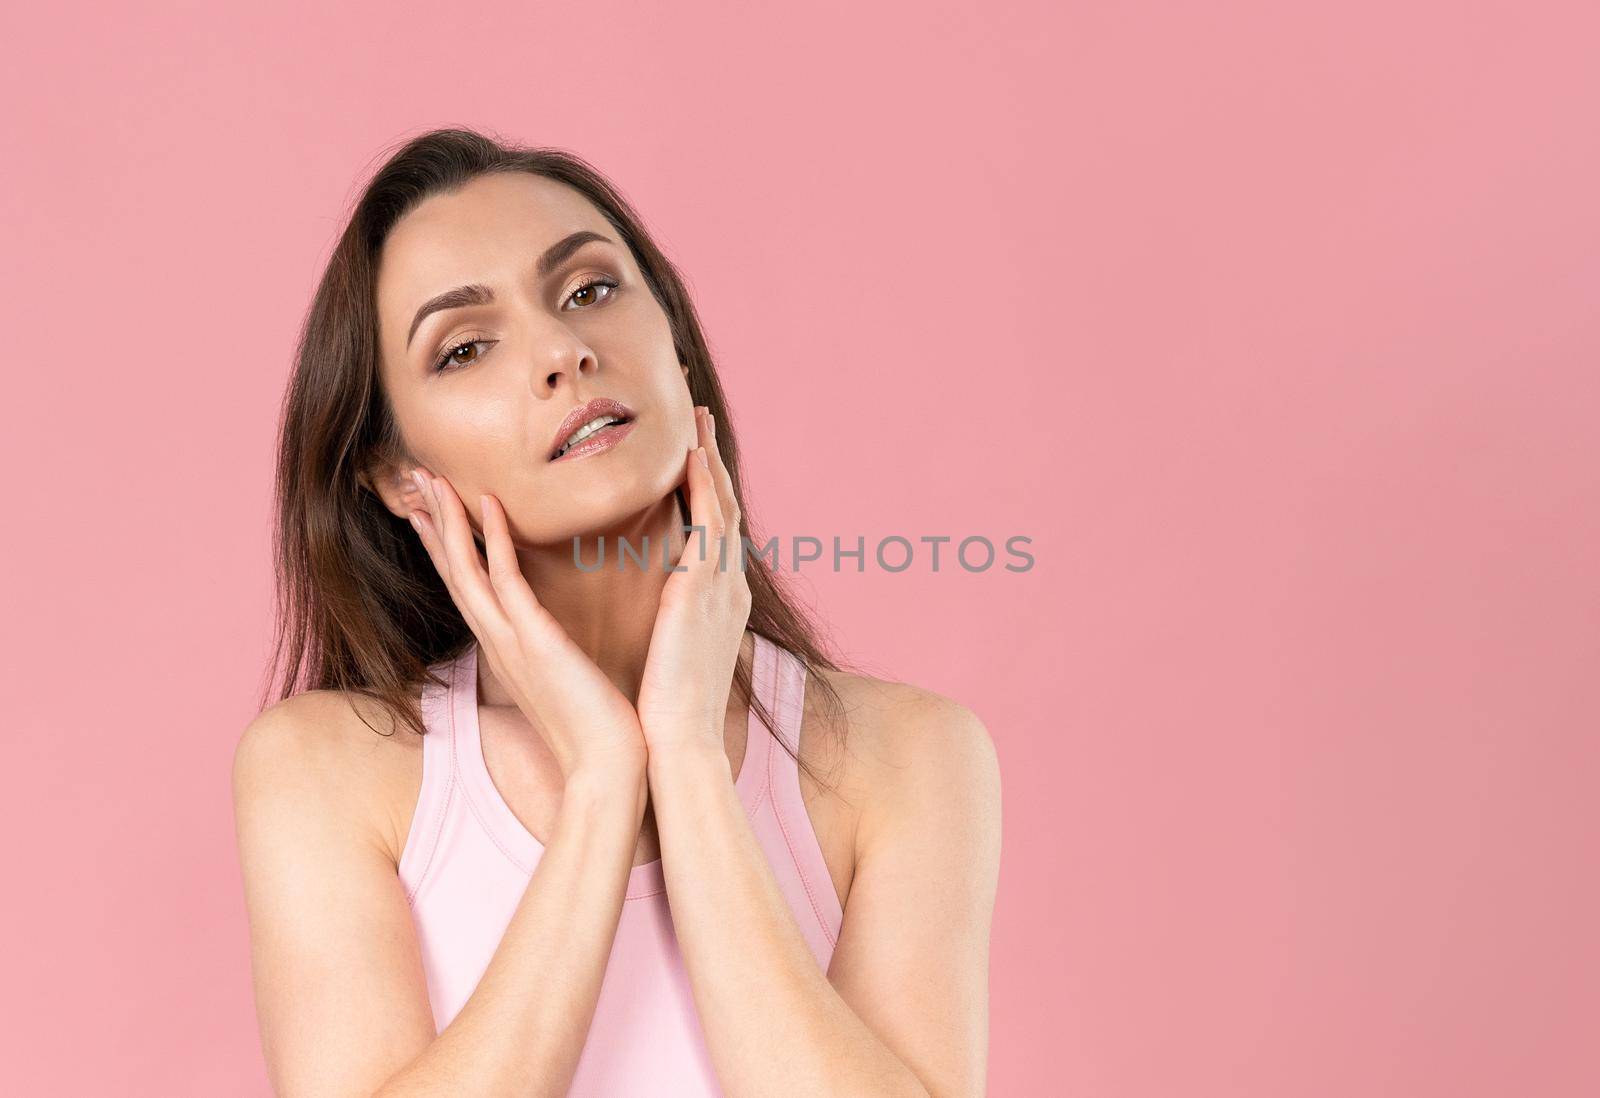 Moisturising her face beautiful woman with no makeup standing with hands on her chicks, massaging it gently attractive brunette girl on pink background. Skin care concept by LipikStockMedia